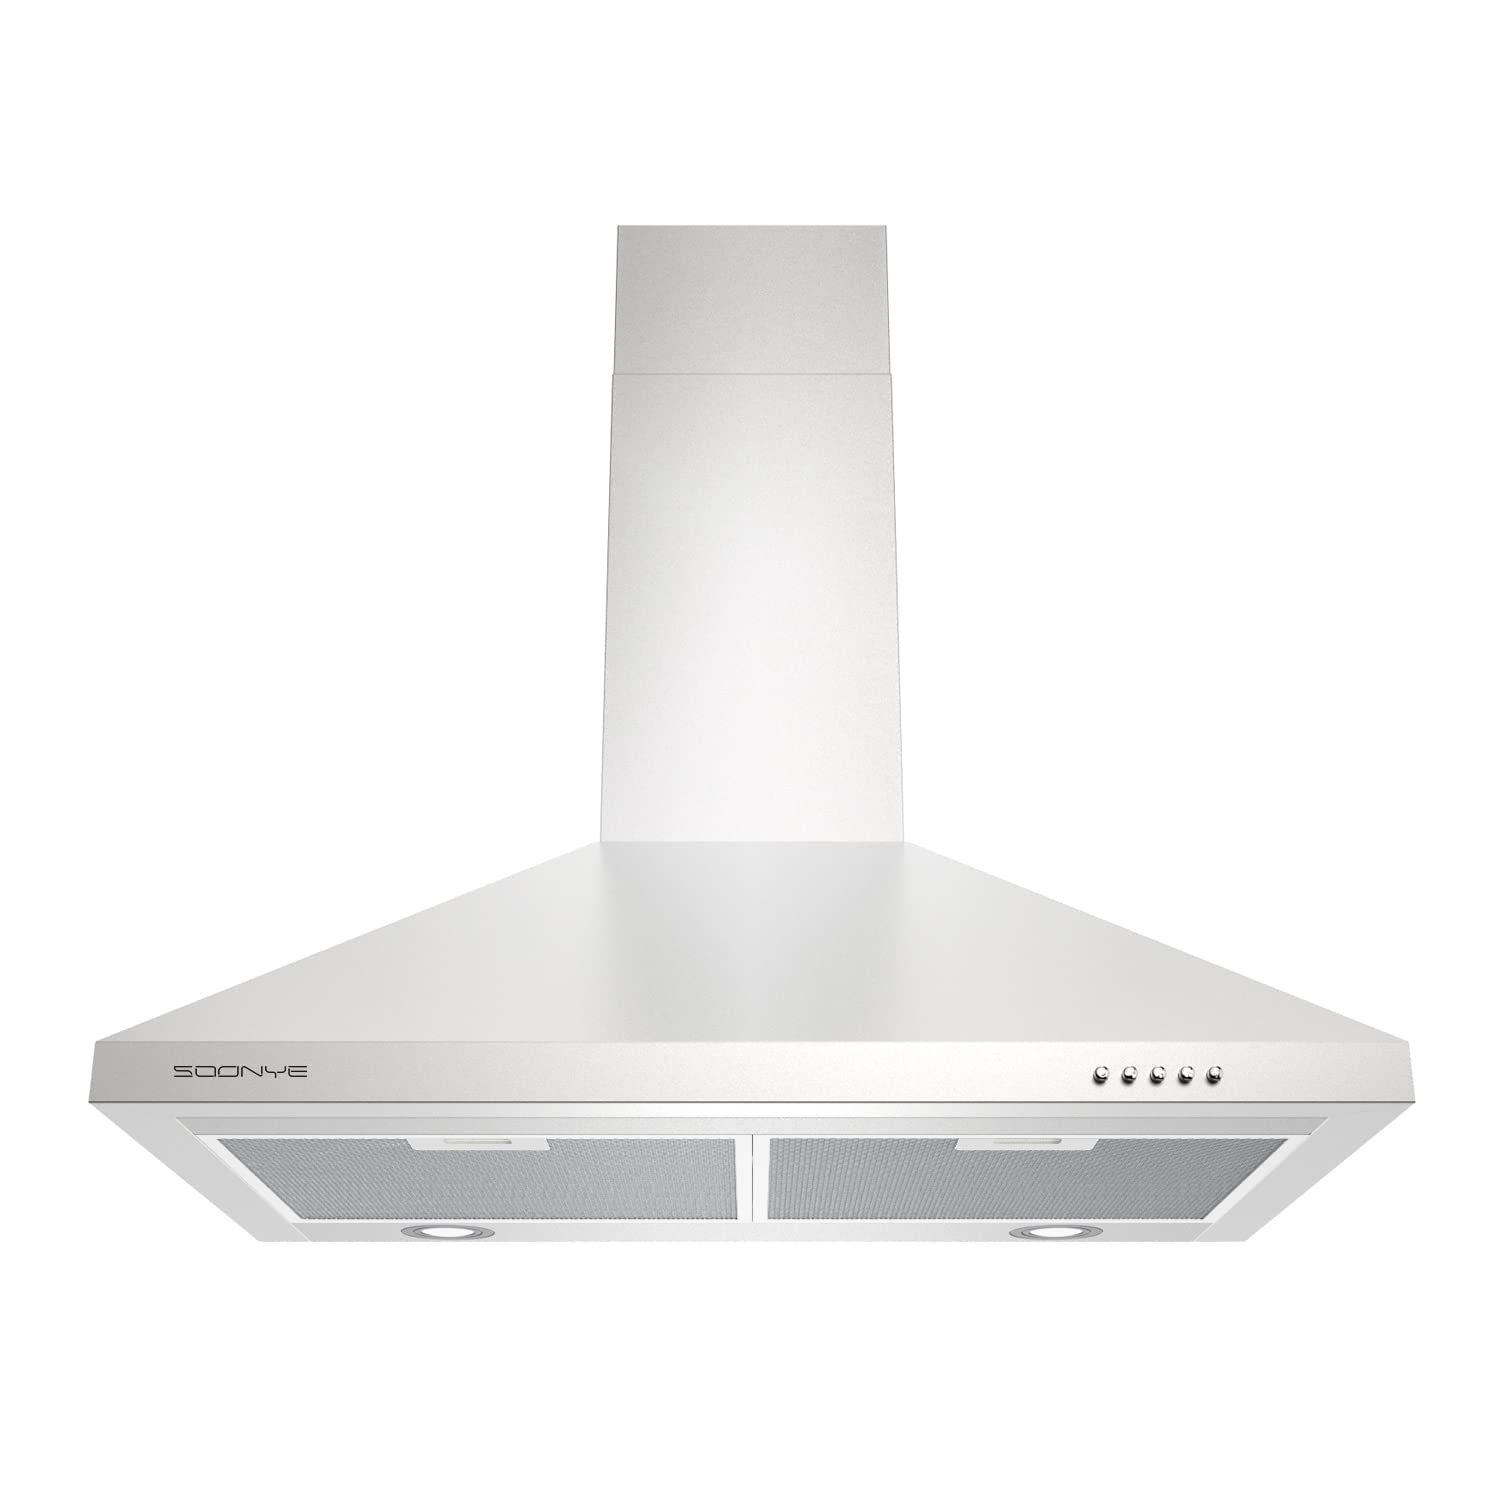 SOONYE 30 inch Stainless Steel Wall Mounted Range Hood, 450 cFM Vent Hood with 3 Speed controls, 5-Layer Aluminum Filters, and D